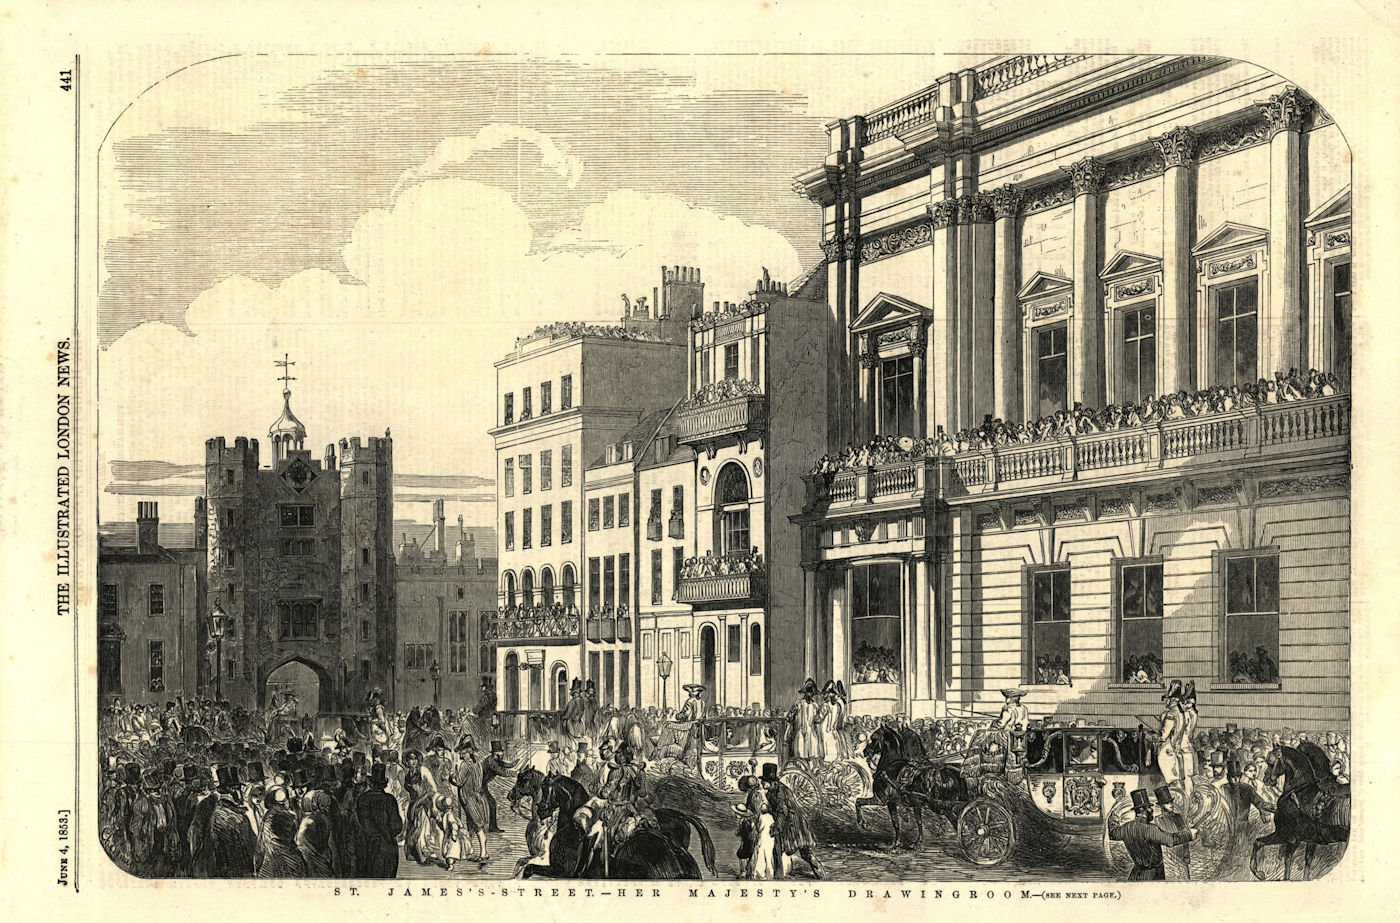 Associate Product St. James's Street - Her Majesty's drawing room. London 1853 old antique print